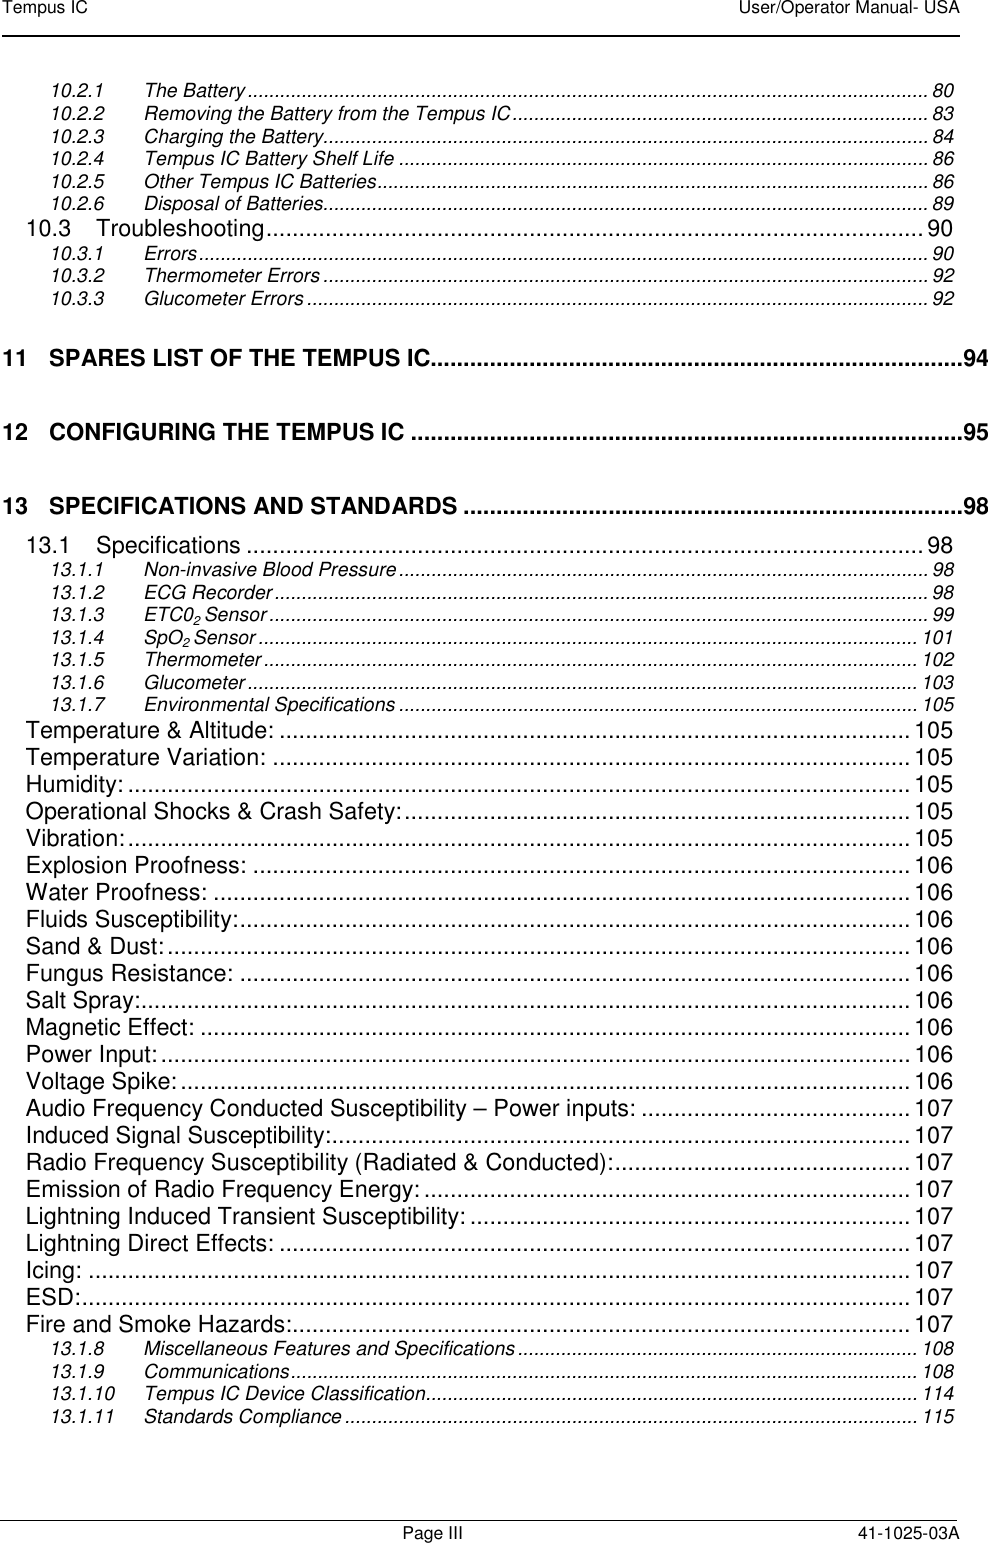 Tempus IC    User/Operator Manual- USA        Page III  41-1025-03A 10.2.1 The Battery .............................................................................................................................. 80 10.2.2 Removing the Battery from the Tempus IC ............................................................................. 83 10.2.3 Charging the Battery................................................................................................................ 84 10.2.4 Tempus IC Battery Shelf Life .................................................................................................. 86 10.2.5 Other Tempus IC Batteries ...................................................................................................... 86 10.2.6 Disposal of Batteries................................................................................................................ 89 10.3 Troubleshooting .................................................................................................... 90 10.3.1 Errors ....................................................................................................................................... 90 10.3.2 Thermometer Errors ................................................................................................................ 92 10.3.3 Glucometer Errors ................................................................................................................... 92 11 SPARES LIST OF THE TEMPUS IC.................................................................................94 12 CONFIGURING THE TEMPUS IC ....................................................................................95 13 SPECIFICATIONS AND STANDARDS ............................................................................98 13.1 Specifications ....................................................................................................... 98 13.1.1 Non-invasive Blood Pressure .................................................................................................. 98 13.1.2 ECG Recorder ......................................................................................................................... 98 13.1.3 ETC02 Sensor .......................................................................................................................... 99 13.1.4 SpO2 Sensor .......................................................................................................................... 101 13.1.5 Thermometer ......................................................................................................................... 102 13.1.6 Glucometer ............................................................................................................................ 103 13.1.7 Environmental Specifications ................................................................................................ 105 Temperature &amp; Altitude: ................................................................................................ 105 Temperature Variation: ................................................................................................. 105 Humidity: ....................................................................................................................... 105 Operational Shocks &amp; Crash Safety: ............................................................................. 105 Vibration: ....................................................................................................................... 105 Explosion Proofness: .................................................................................................... 106 Water Proofness: .......................................................................................................... 106 Fluids Susceptibility: ...................................................................................................... 106 Sand &amp; Dust: ................................................................................................................. 106 Fungus Resistance: ...................................................................................................... 106 Salt Spray: ..................................................................................................................... 106 Magnetic Effect: ............................................................................................................ 106 Power Input: .................................................................................................................. 106 Voltage Spike: ............................................................................................................... 106 Audio Frequency Conducted Susceptibility – Power inputs: ......................................... 107 Induced Signal Susceptibility: ........................................................................................ 107 Radio Frequency Susceptibility (Radiated &amp; Conducted): ............................................. 107 Emission of Radio Frequency Energy: .......................................................................... 107 Lightning Induced Transient Susceptibility: ................................................................... 107 Lightning Direct Effects: ................................................................................................ 107 Icing: ............................................................................................................................. 107 ESD: .............................................................................................................................. 107 Fire and Smoke Hazards: .............................................................................................. 107 13.1.8 Miscellaneous Features and Specifications .......................................................................... 108 13.1.9 Communications .................................................................................................................... 108 13.1.10 Tempus IC Device Classification ........................................................................................... 114 13.1.11 Standards Compliance .......................................................................................................... 115 